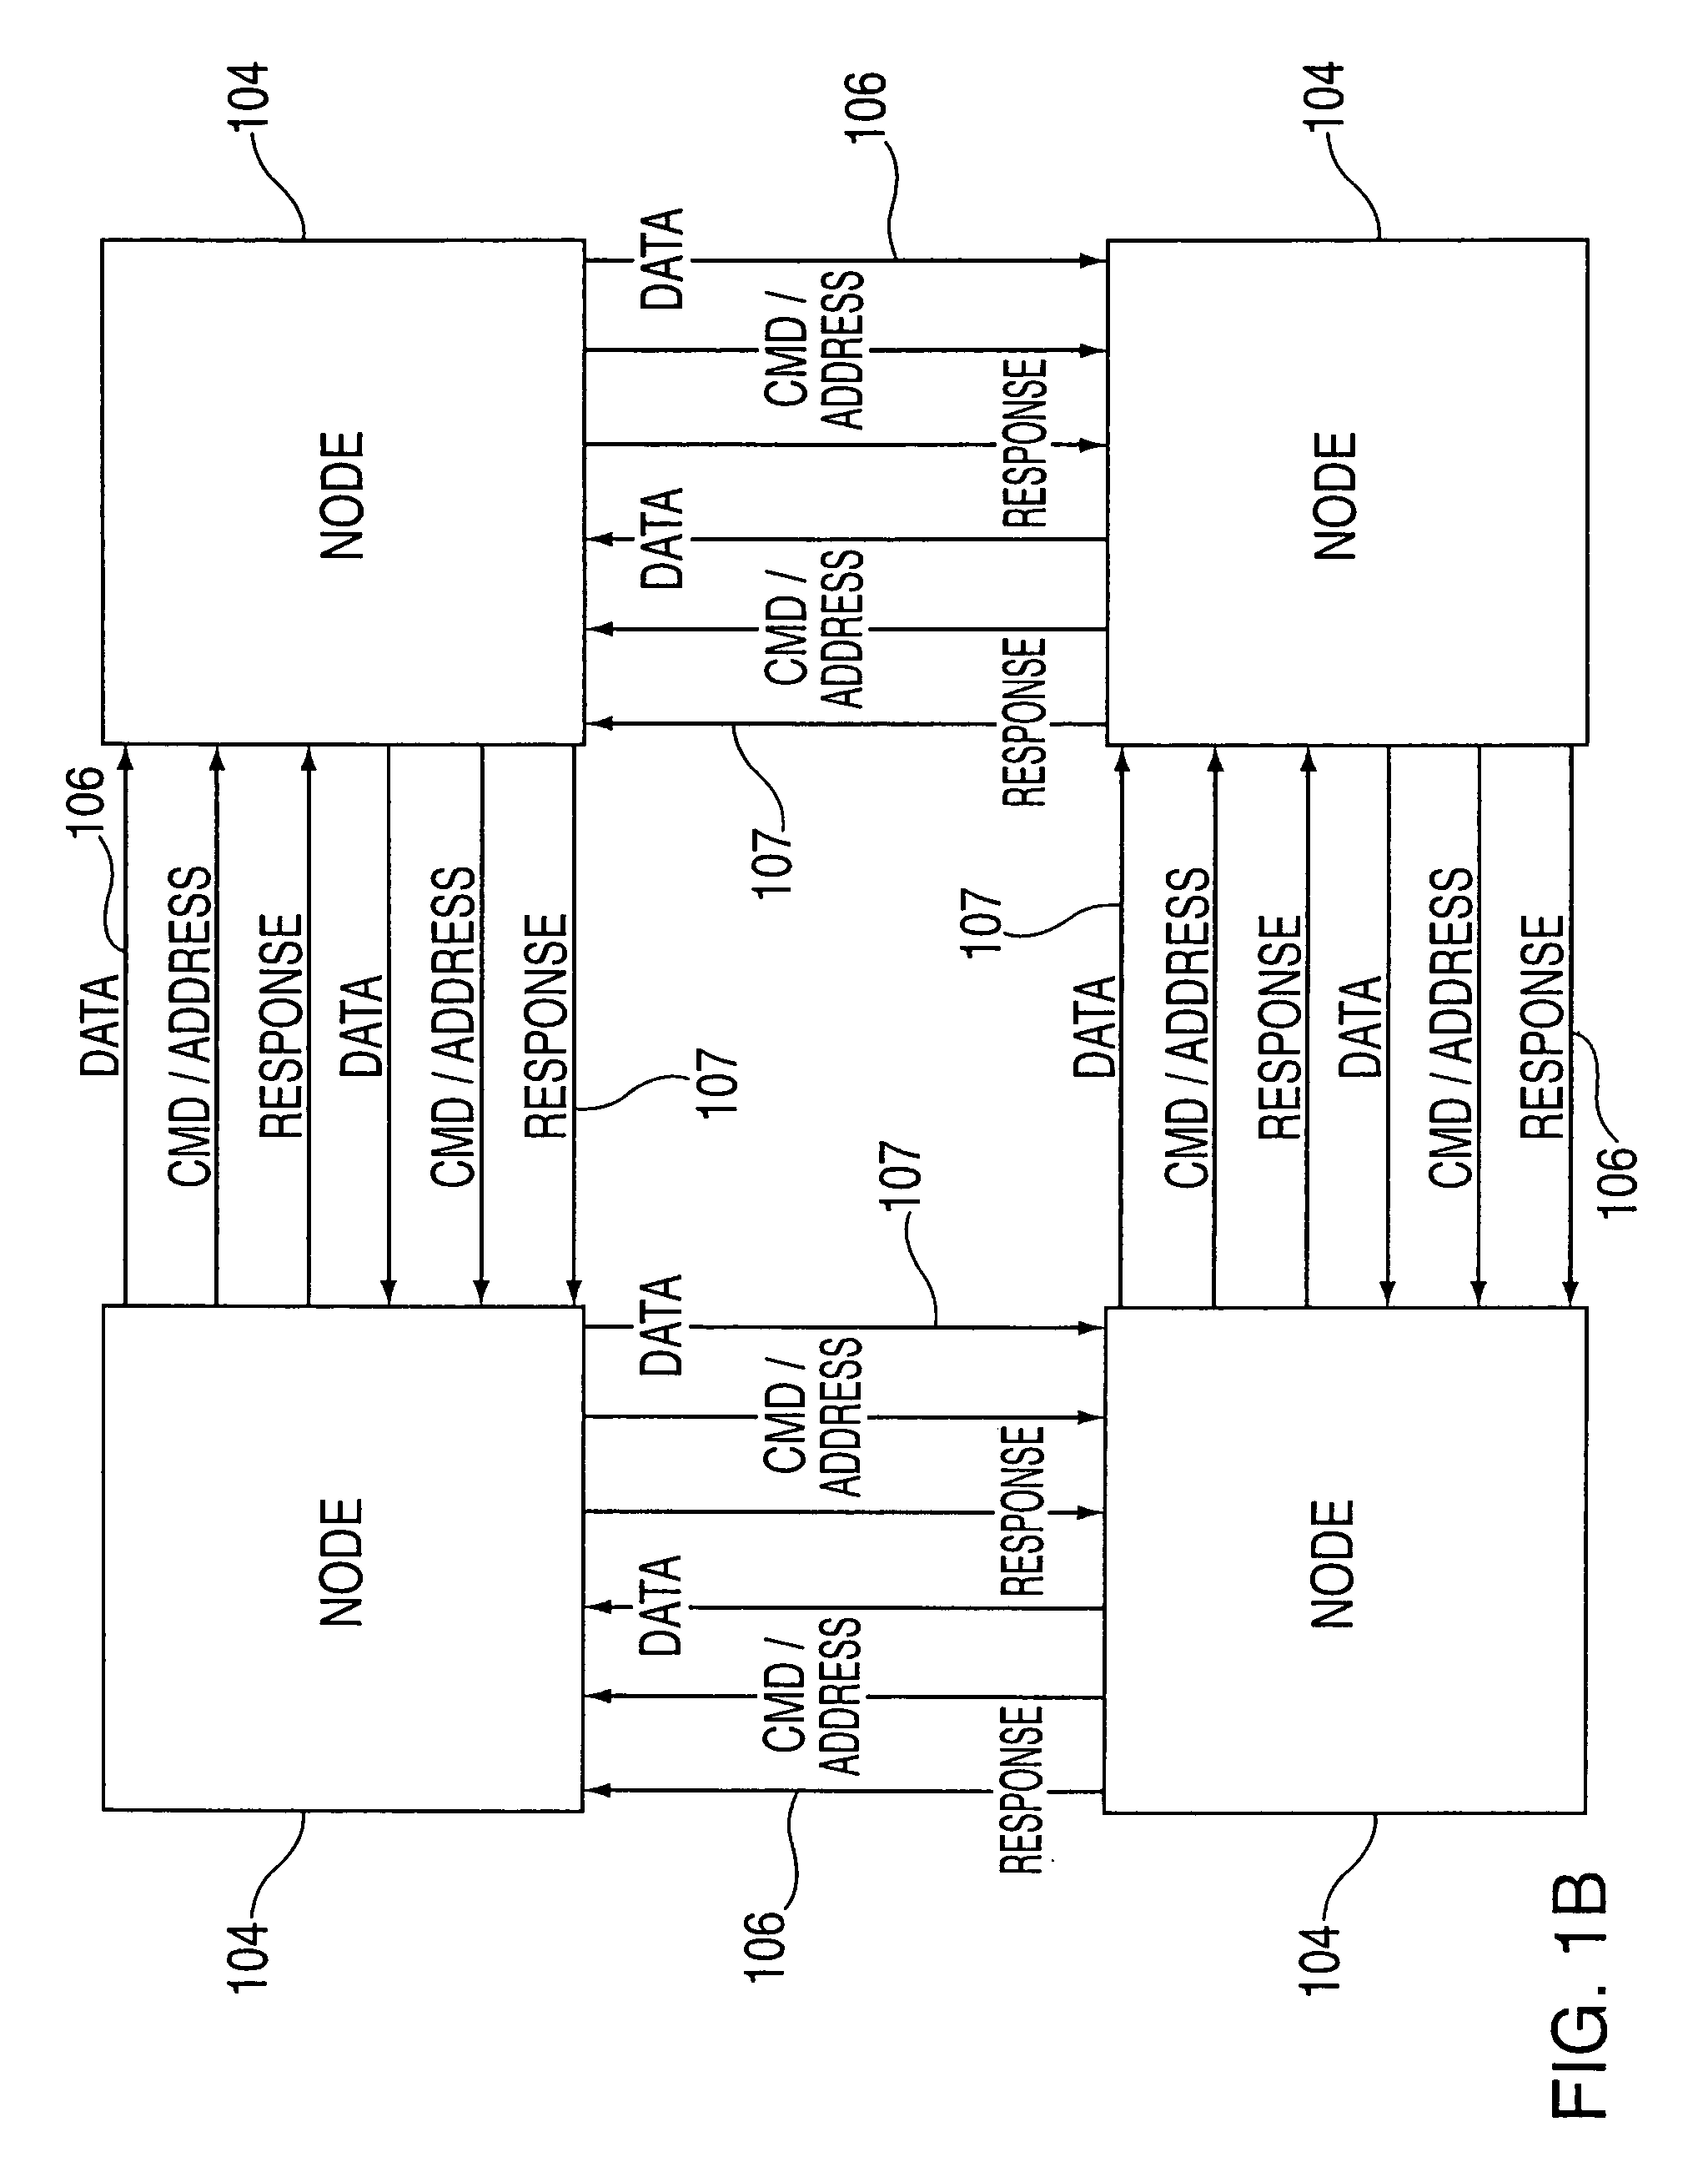 Coherency management for a "switchless" distributed shared memory computer system